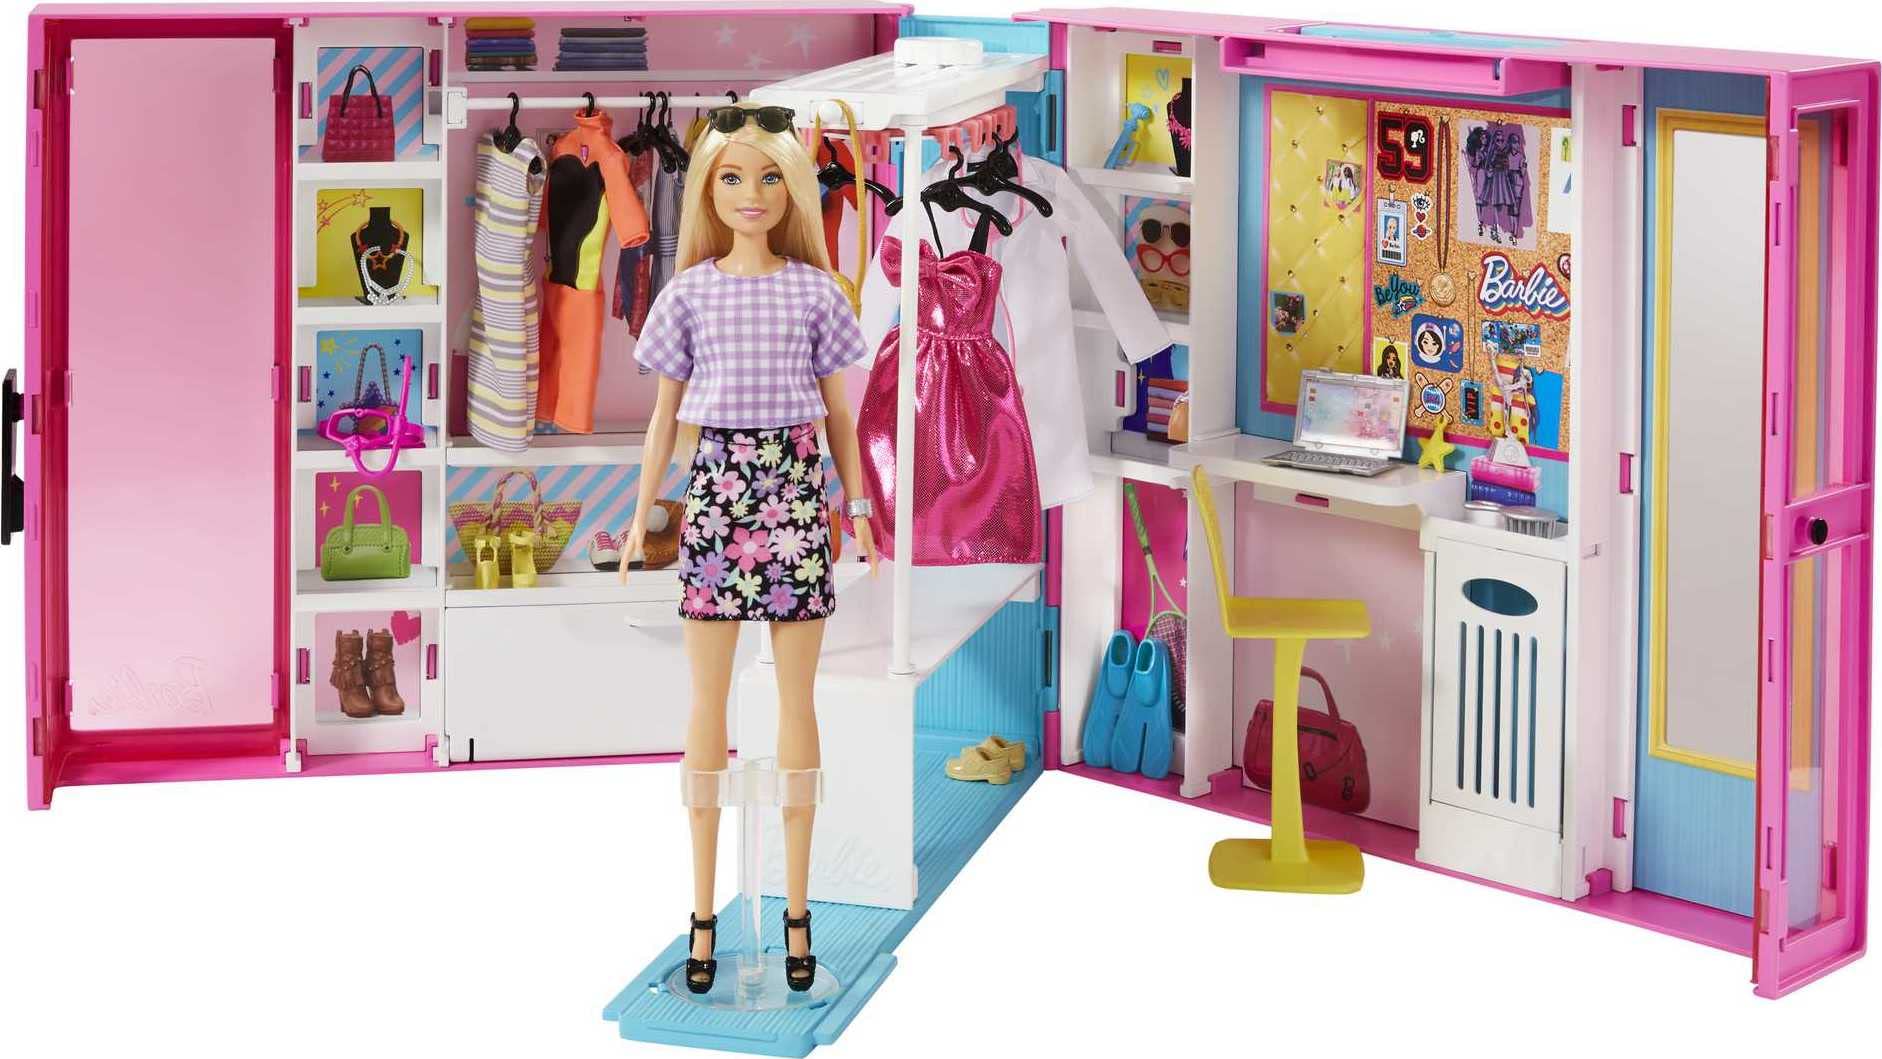 Barbie Dream Closet with Blonde Doll & 25+ Pieces, Toy Closet Expands to 2+ ft Wide & Features 10+ Storage Areas, Full-Length Mirror, Customizable Desk Space and Rotating Clothes Rack